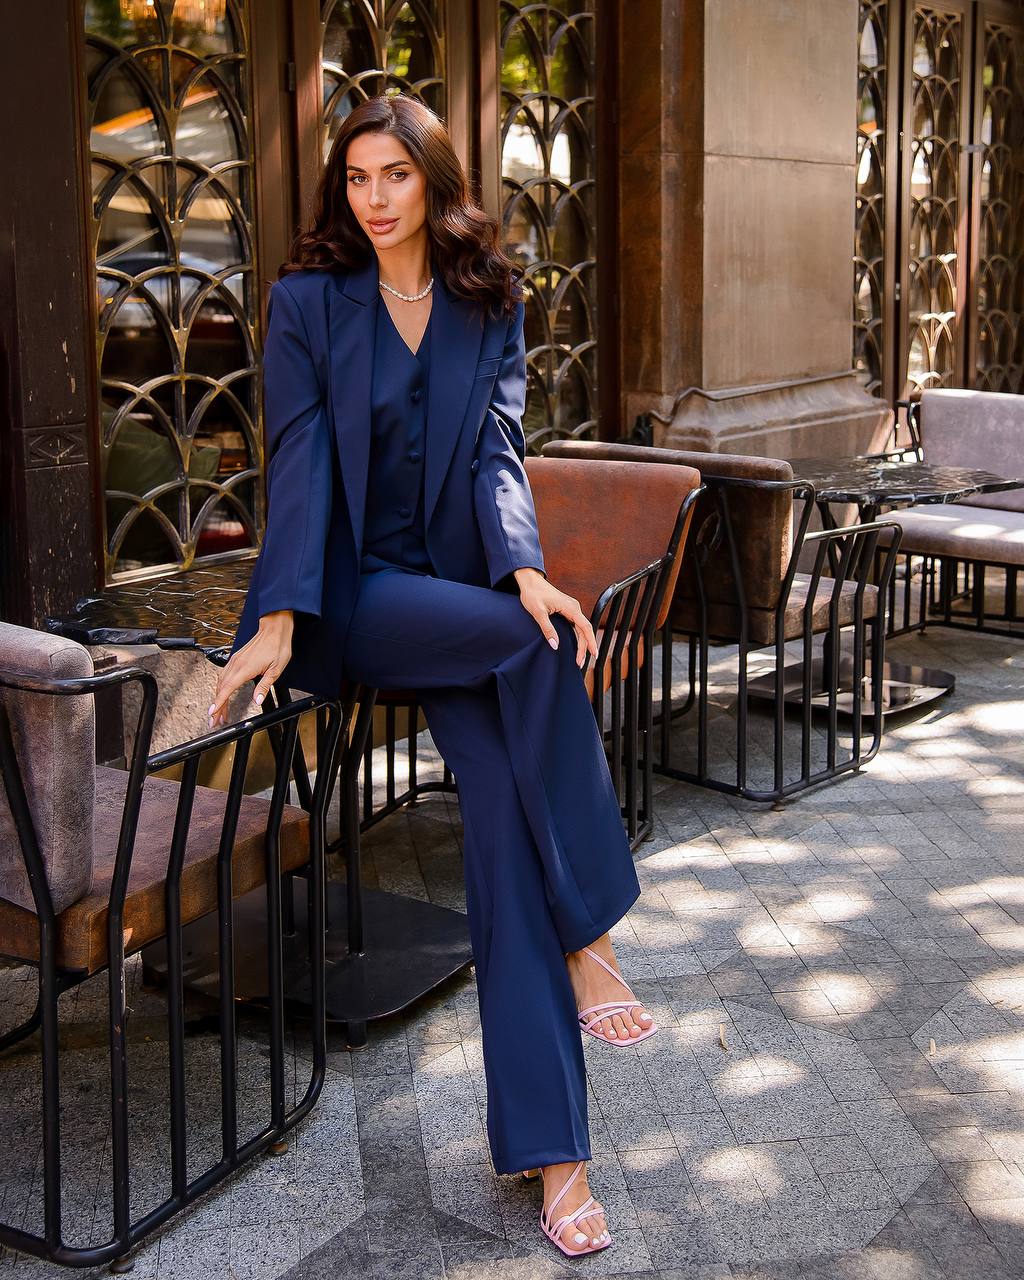 a woman in a blue suit sitting on a bench